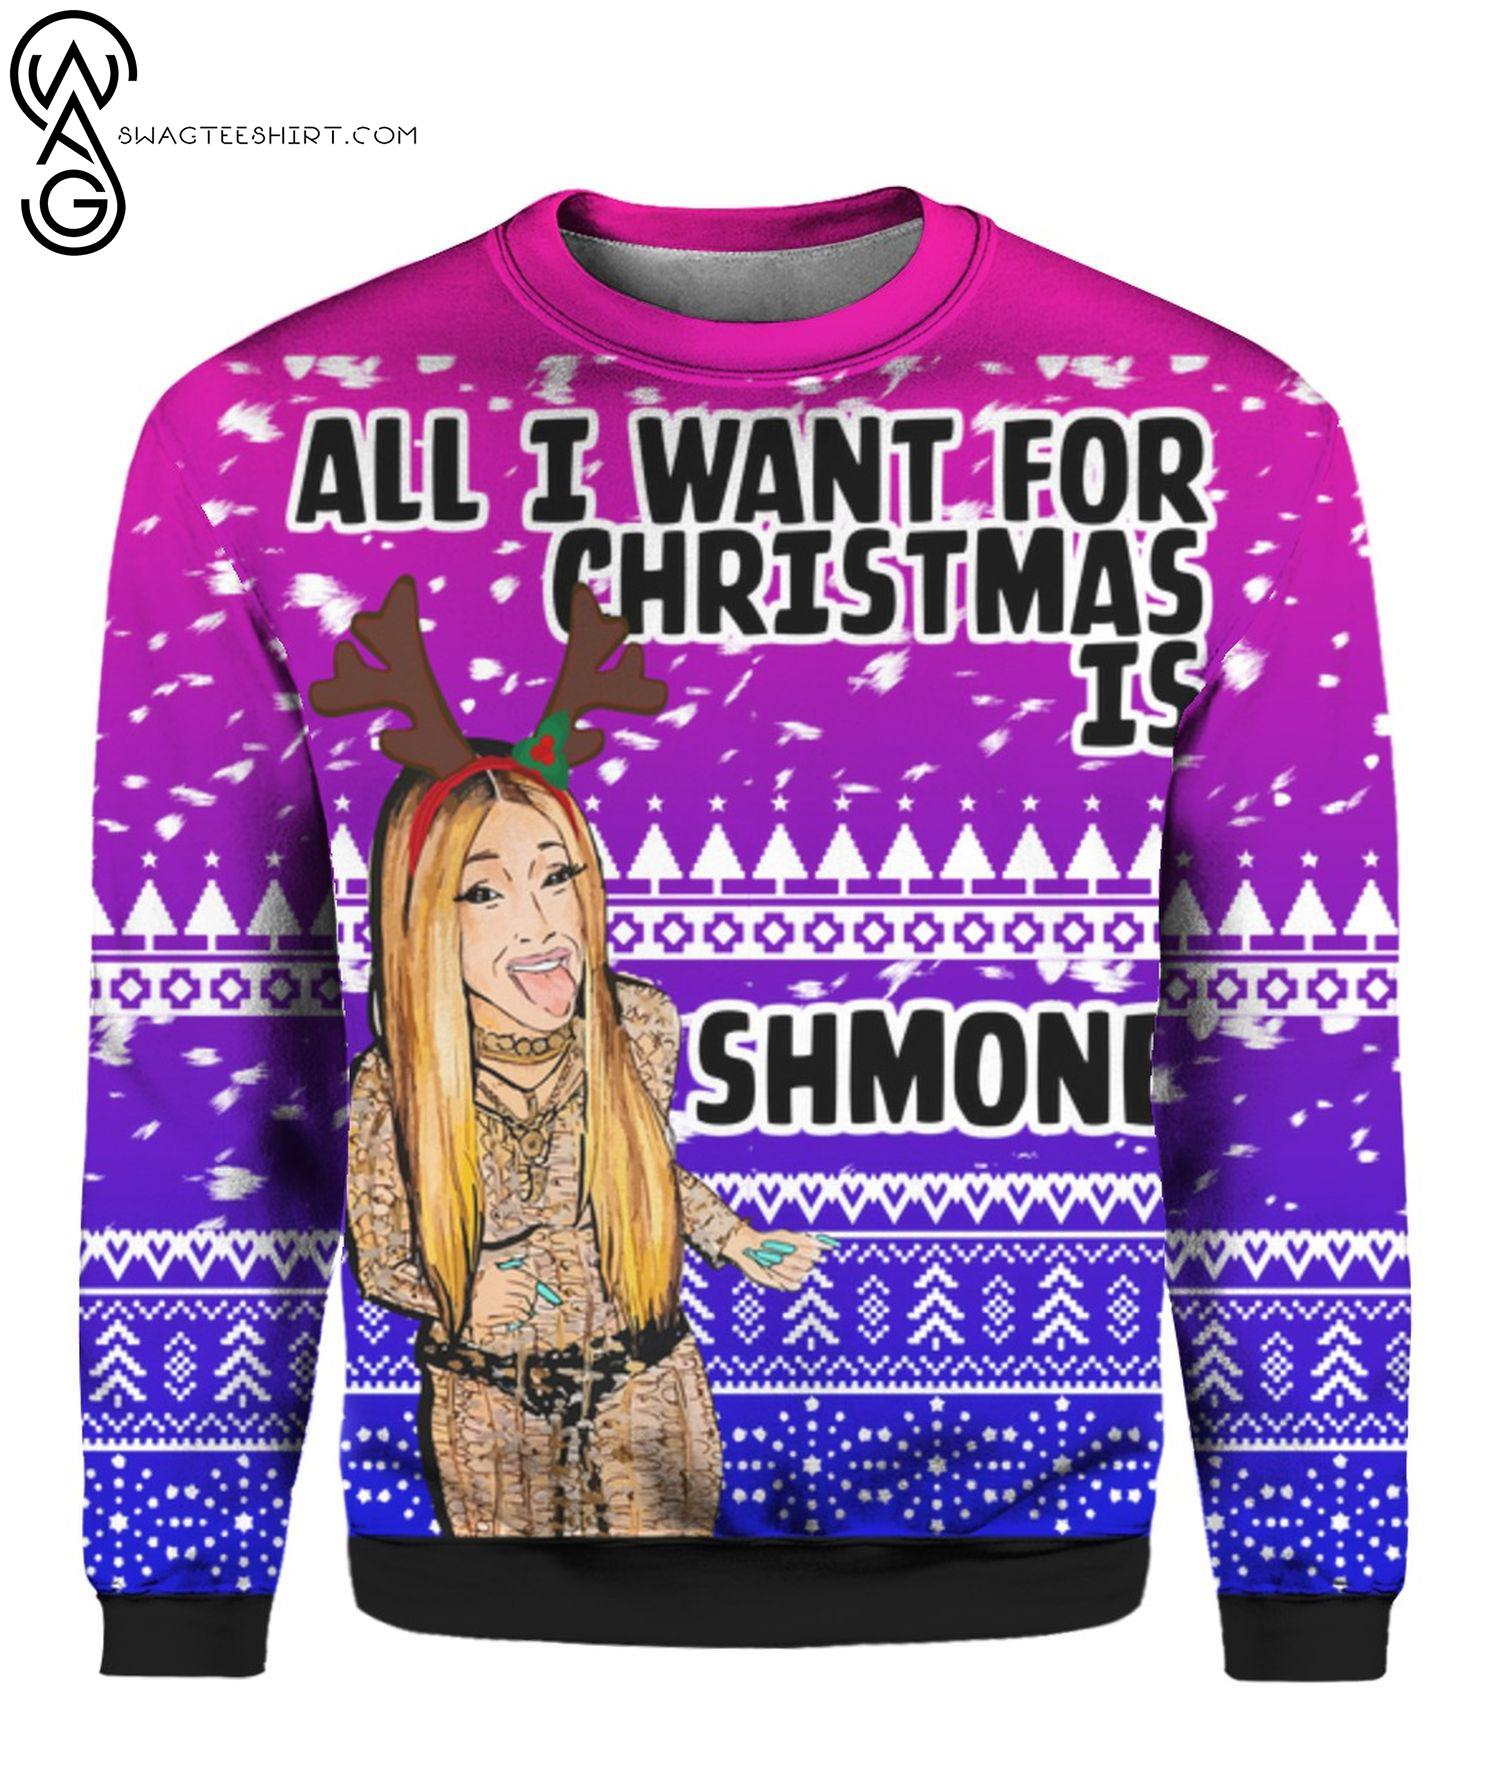 Cardi B All I Want For Christmas Is Shmoney Full Print Ugly Christmas Sweater